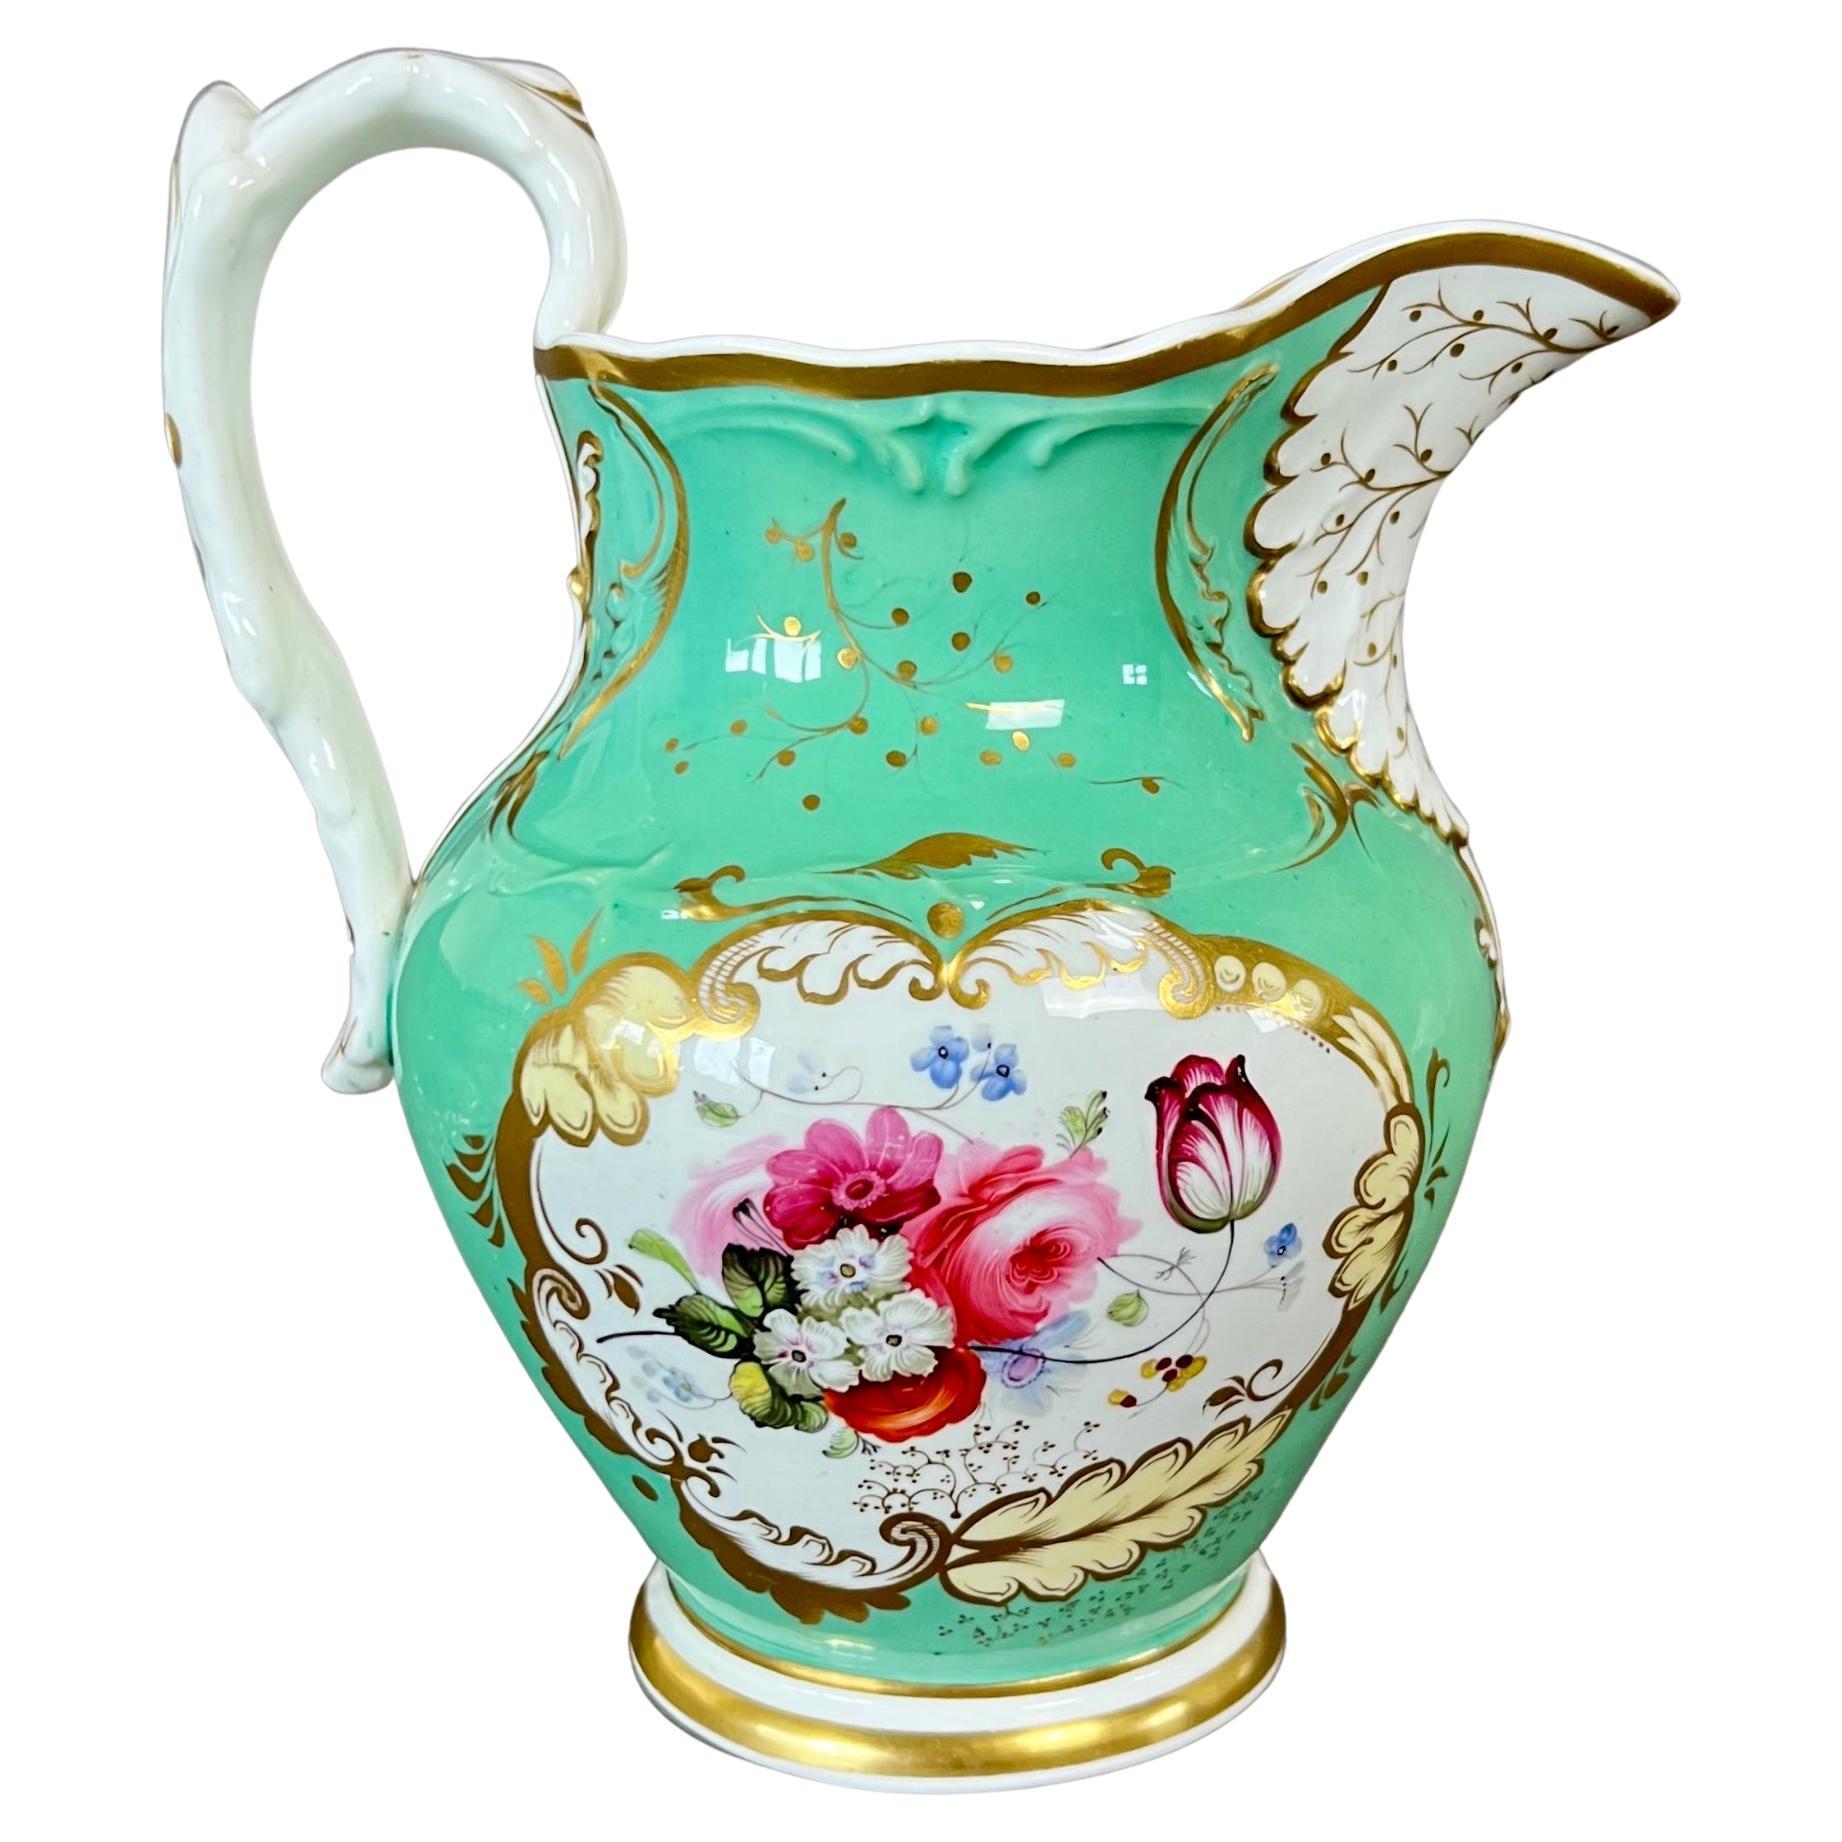 Samuel Alcock Cream Jug Pitcher, Pale Green with Flowers and Landscape, ca 1840 For Sale